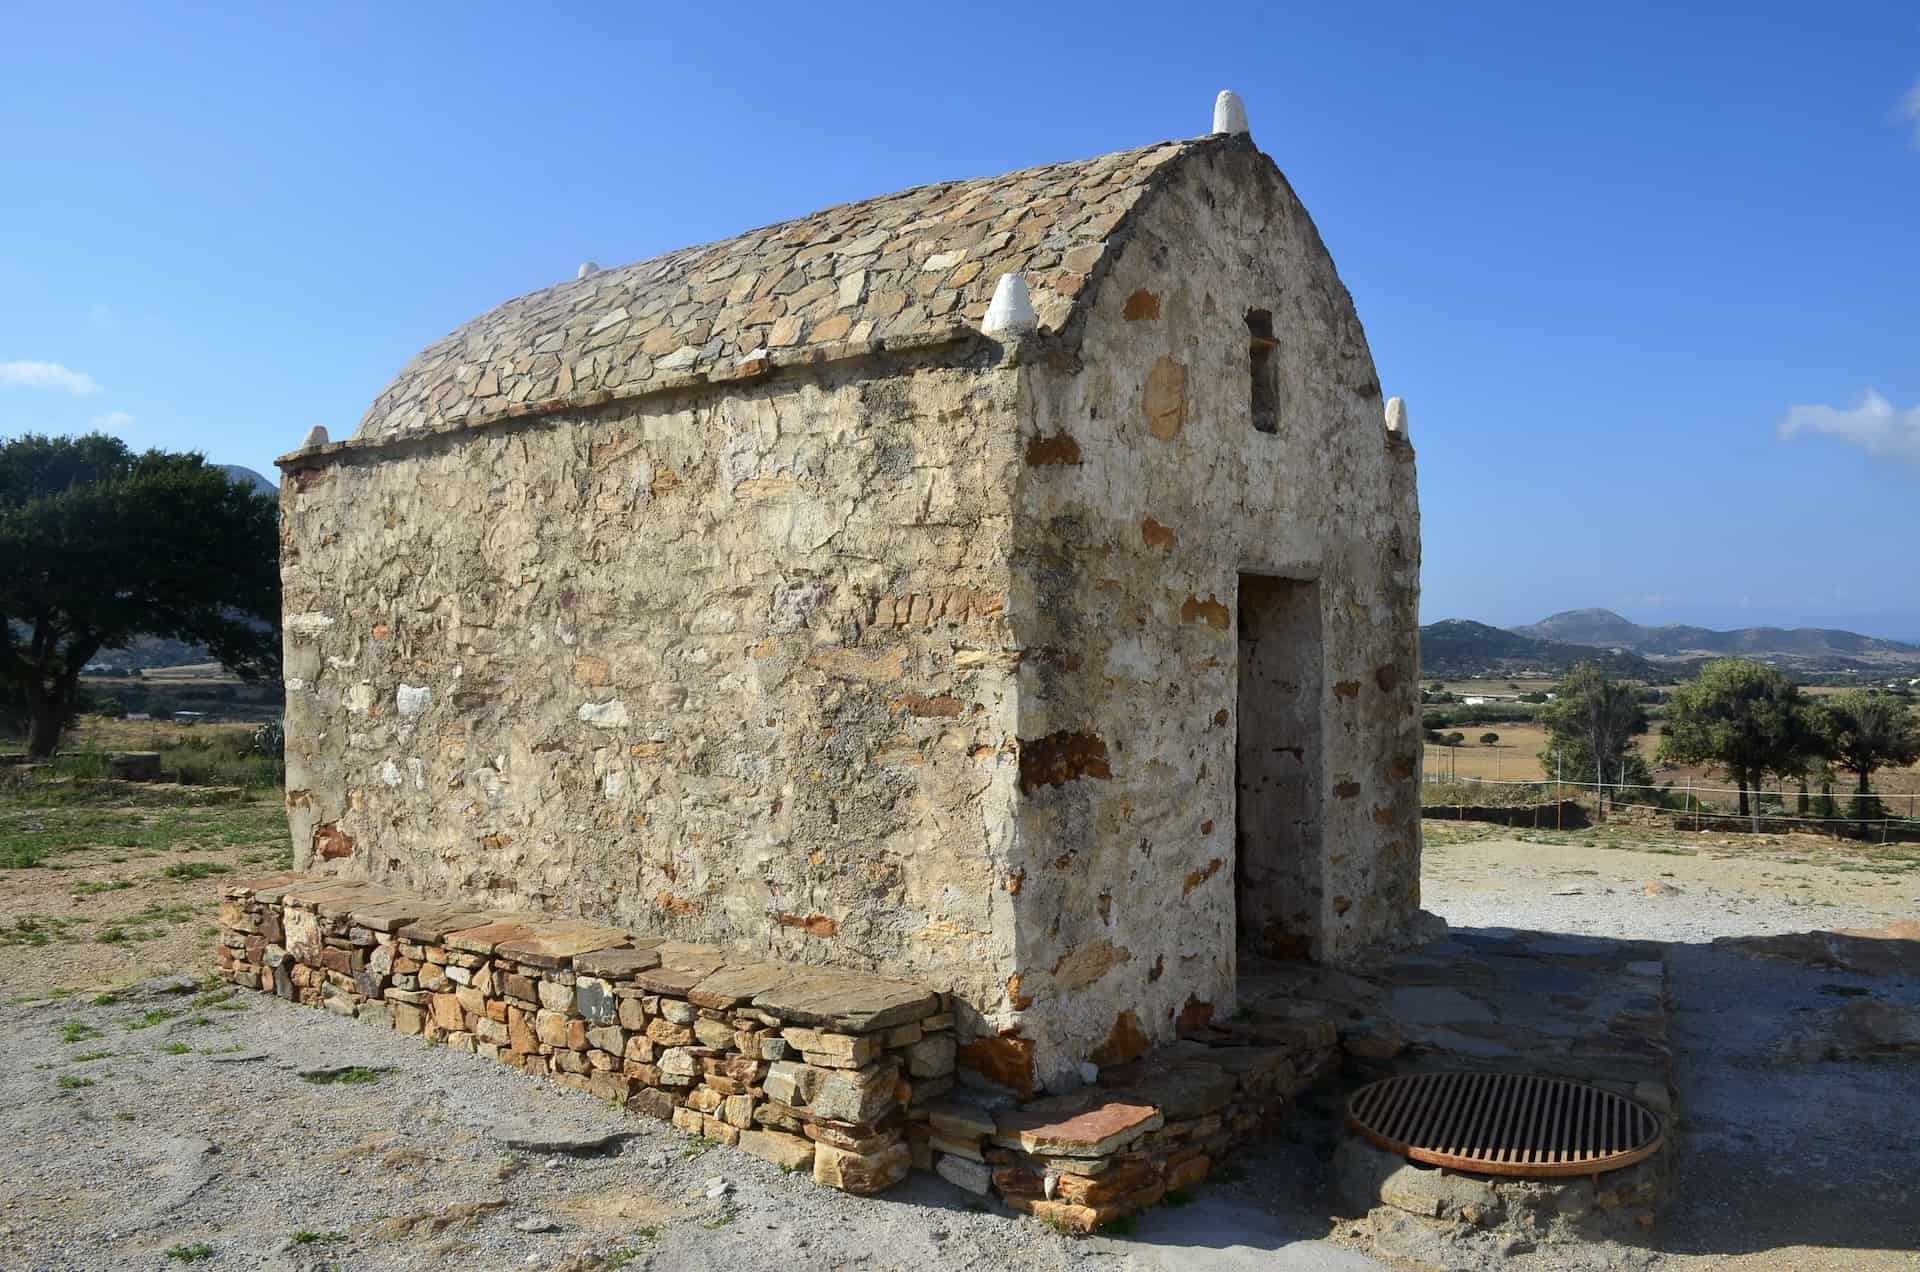 Chapel of St. John the Theologian at the Temple of Demeter in Naxos, Greece